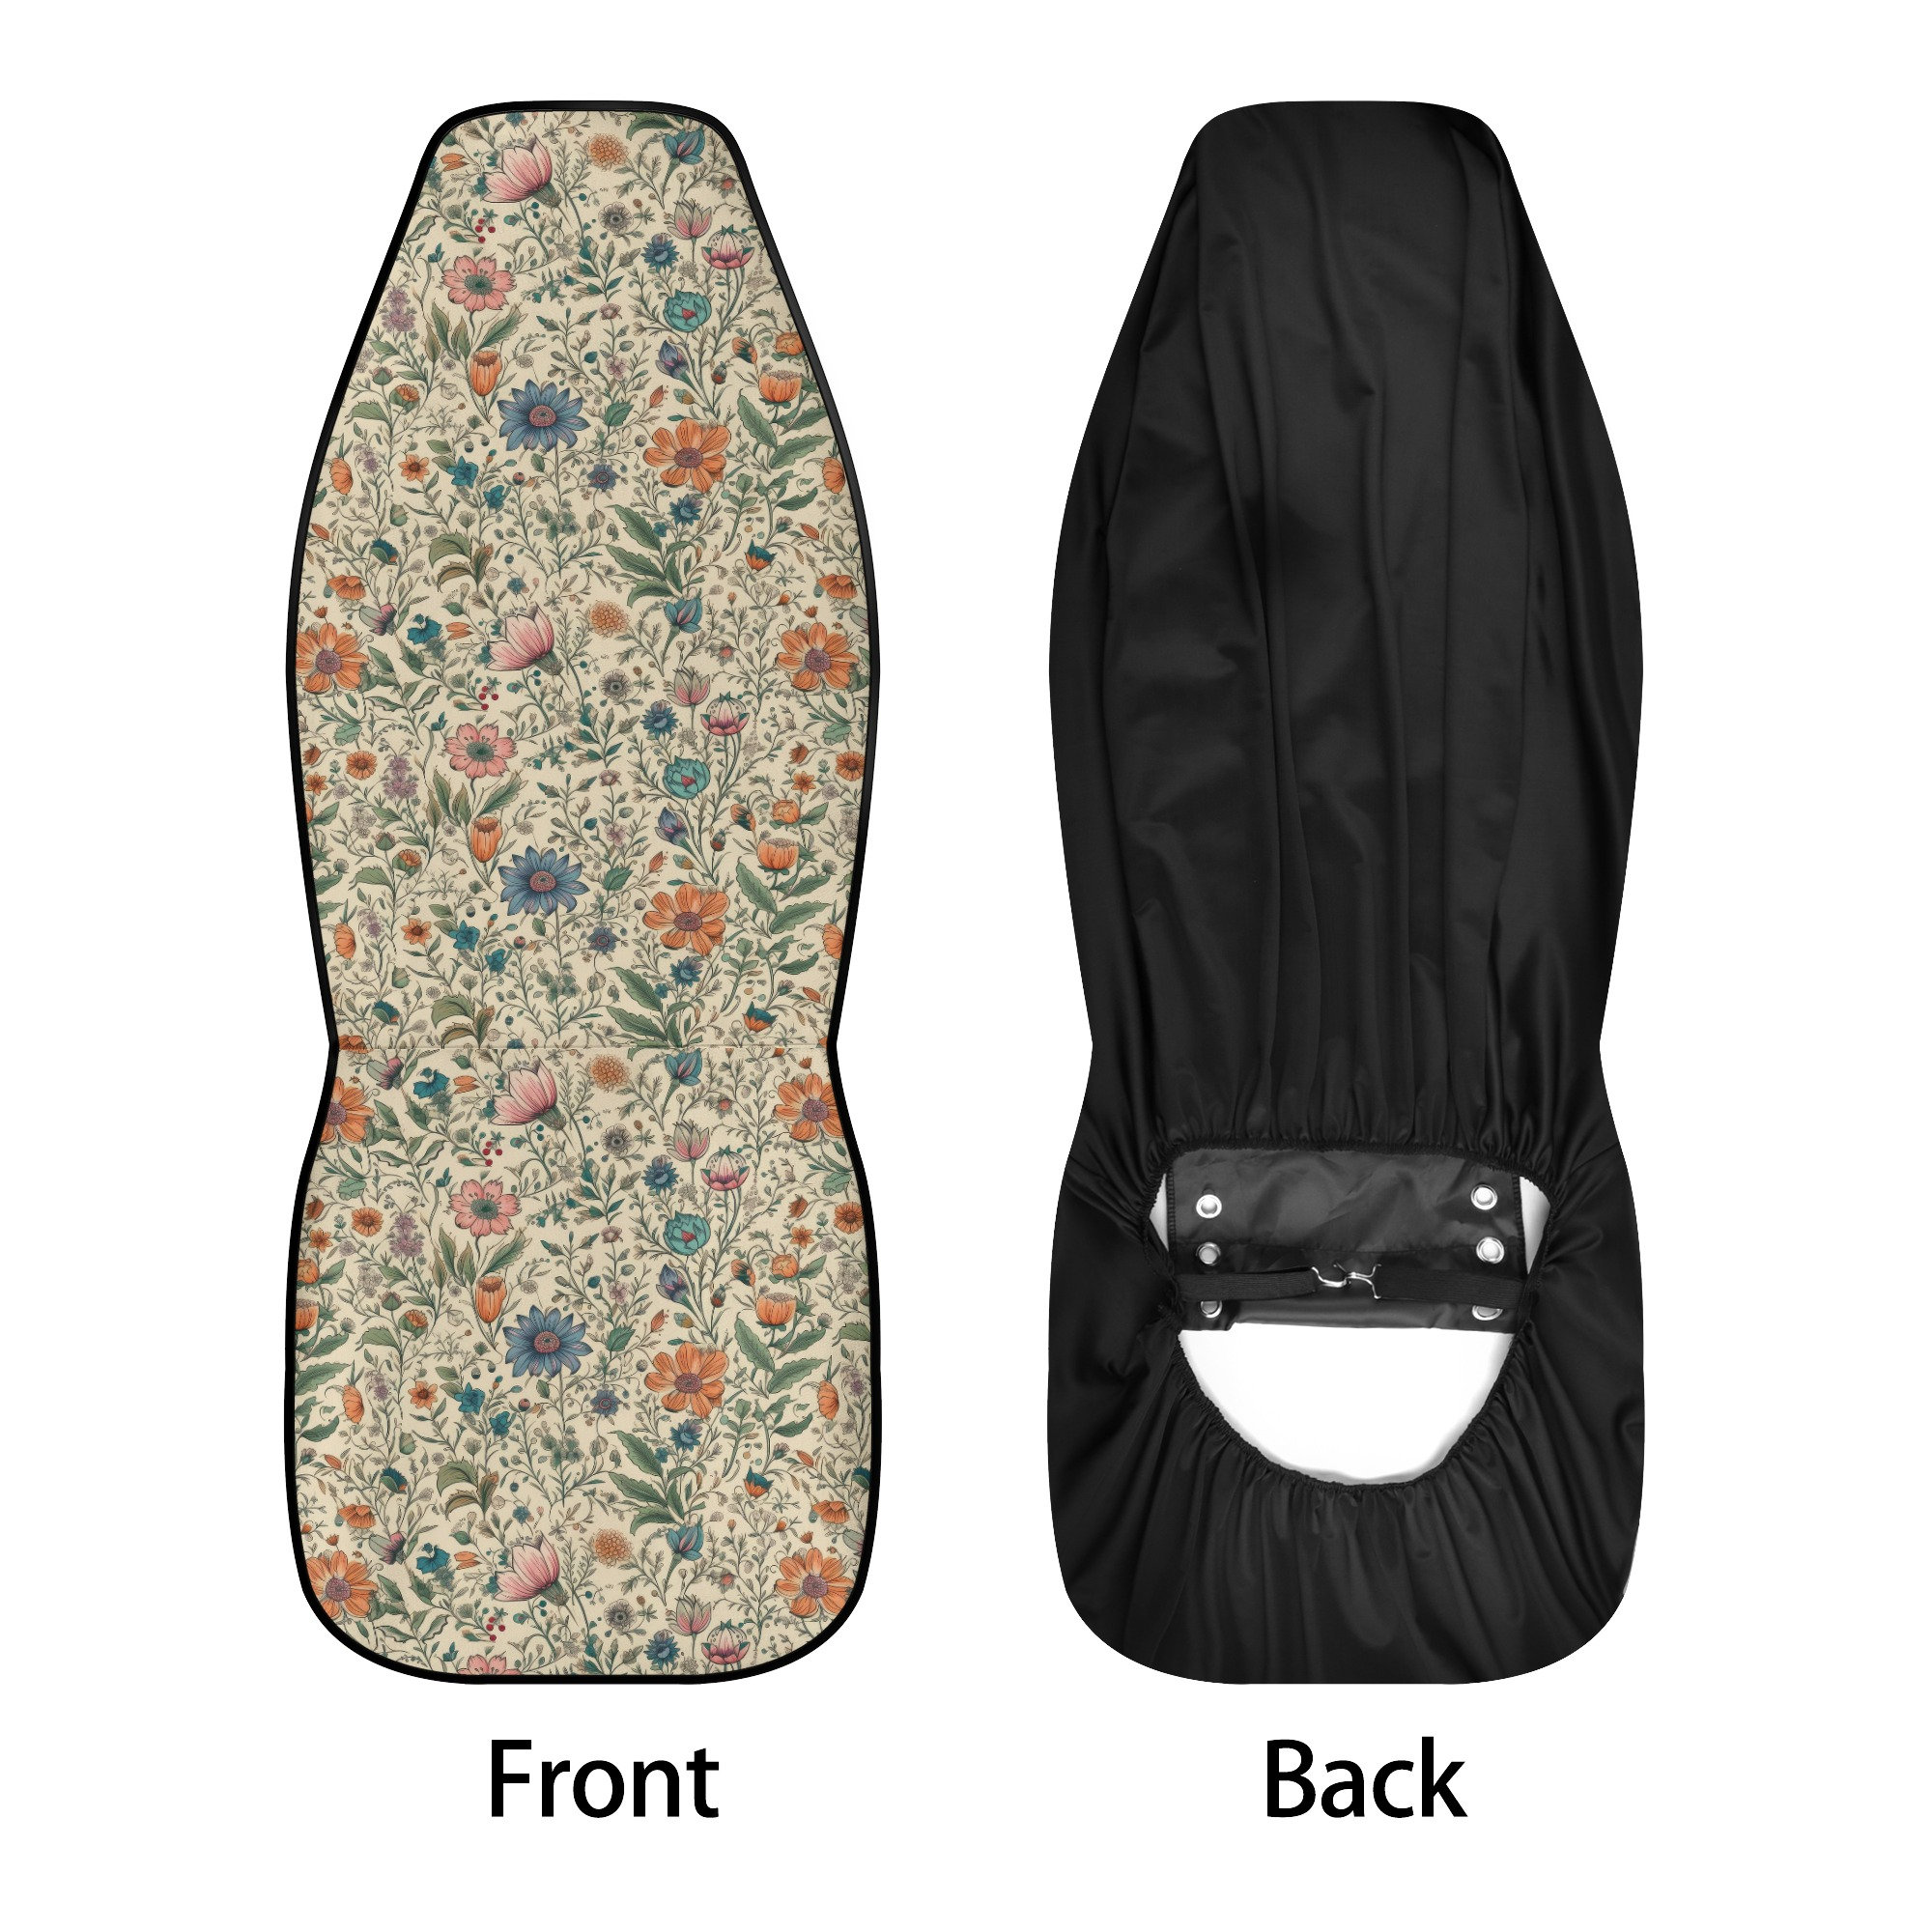 Wildflowers Car Seat Covers, Car Gift